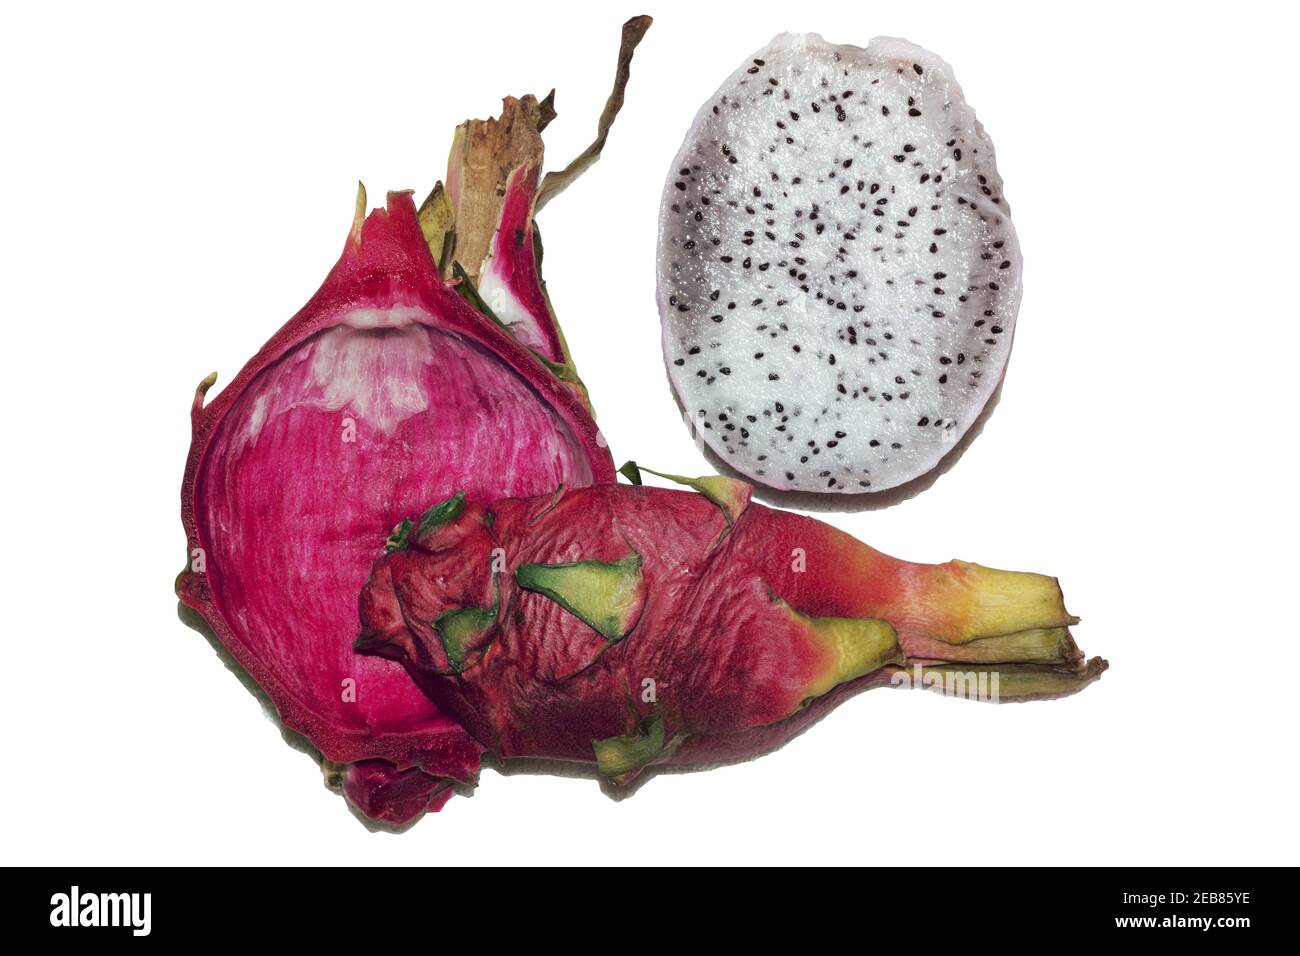 white pitahaya cut into pieces. half without scaly skin, a whole quarter of tropical exotic bright pink fruit with white pulp with small black seeds, Stock Photo